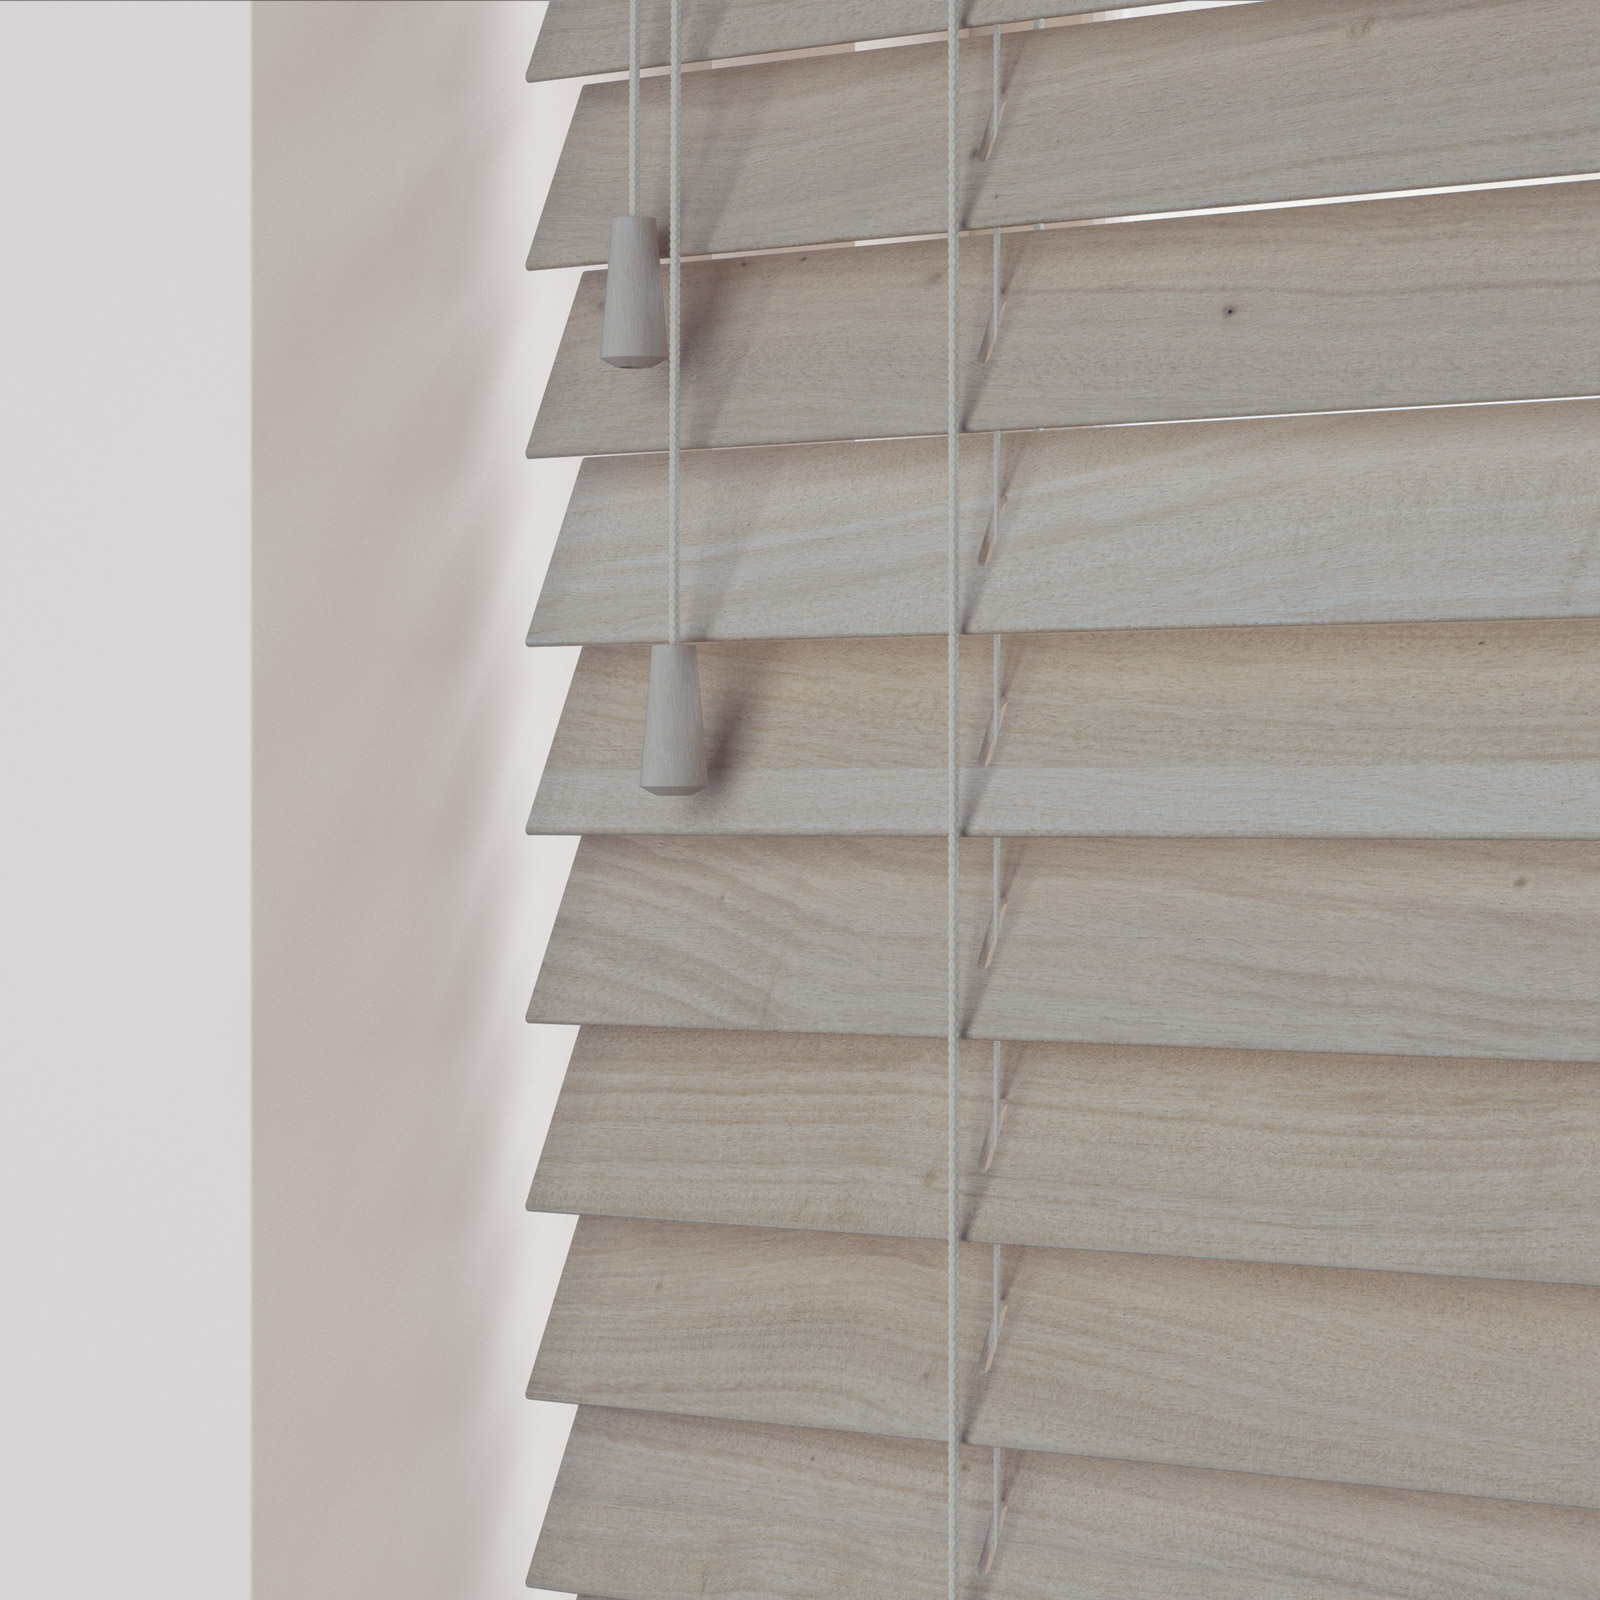 Suppliers of Wooden Venetian Blinds With 25mm Slats